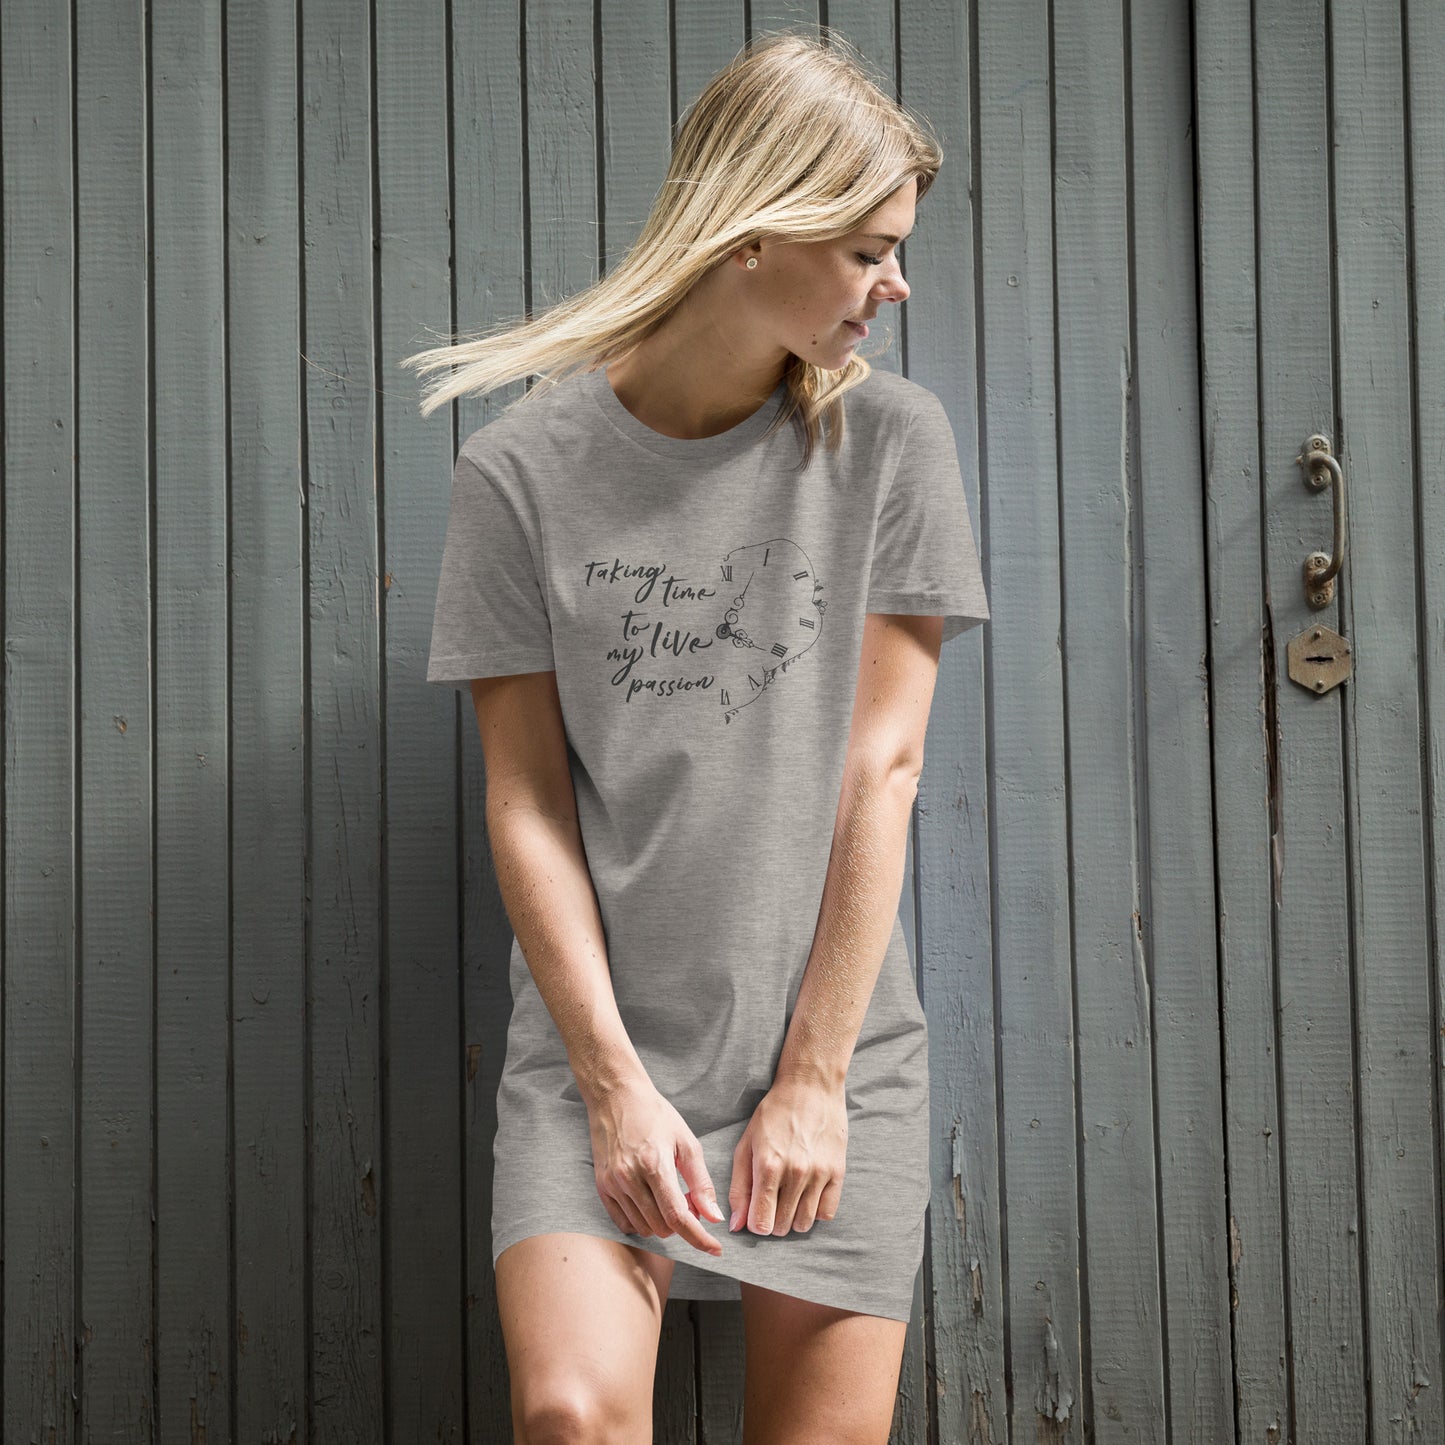 Taking time for my passion - Organic cotton t-shirt dress - HobbyMeFree